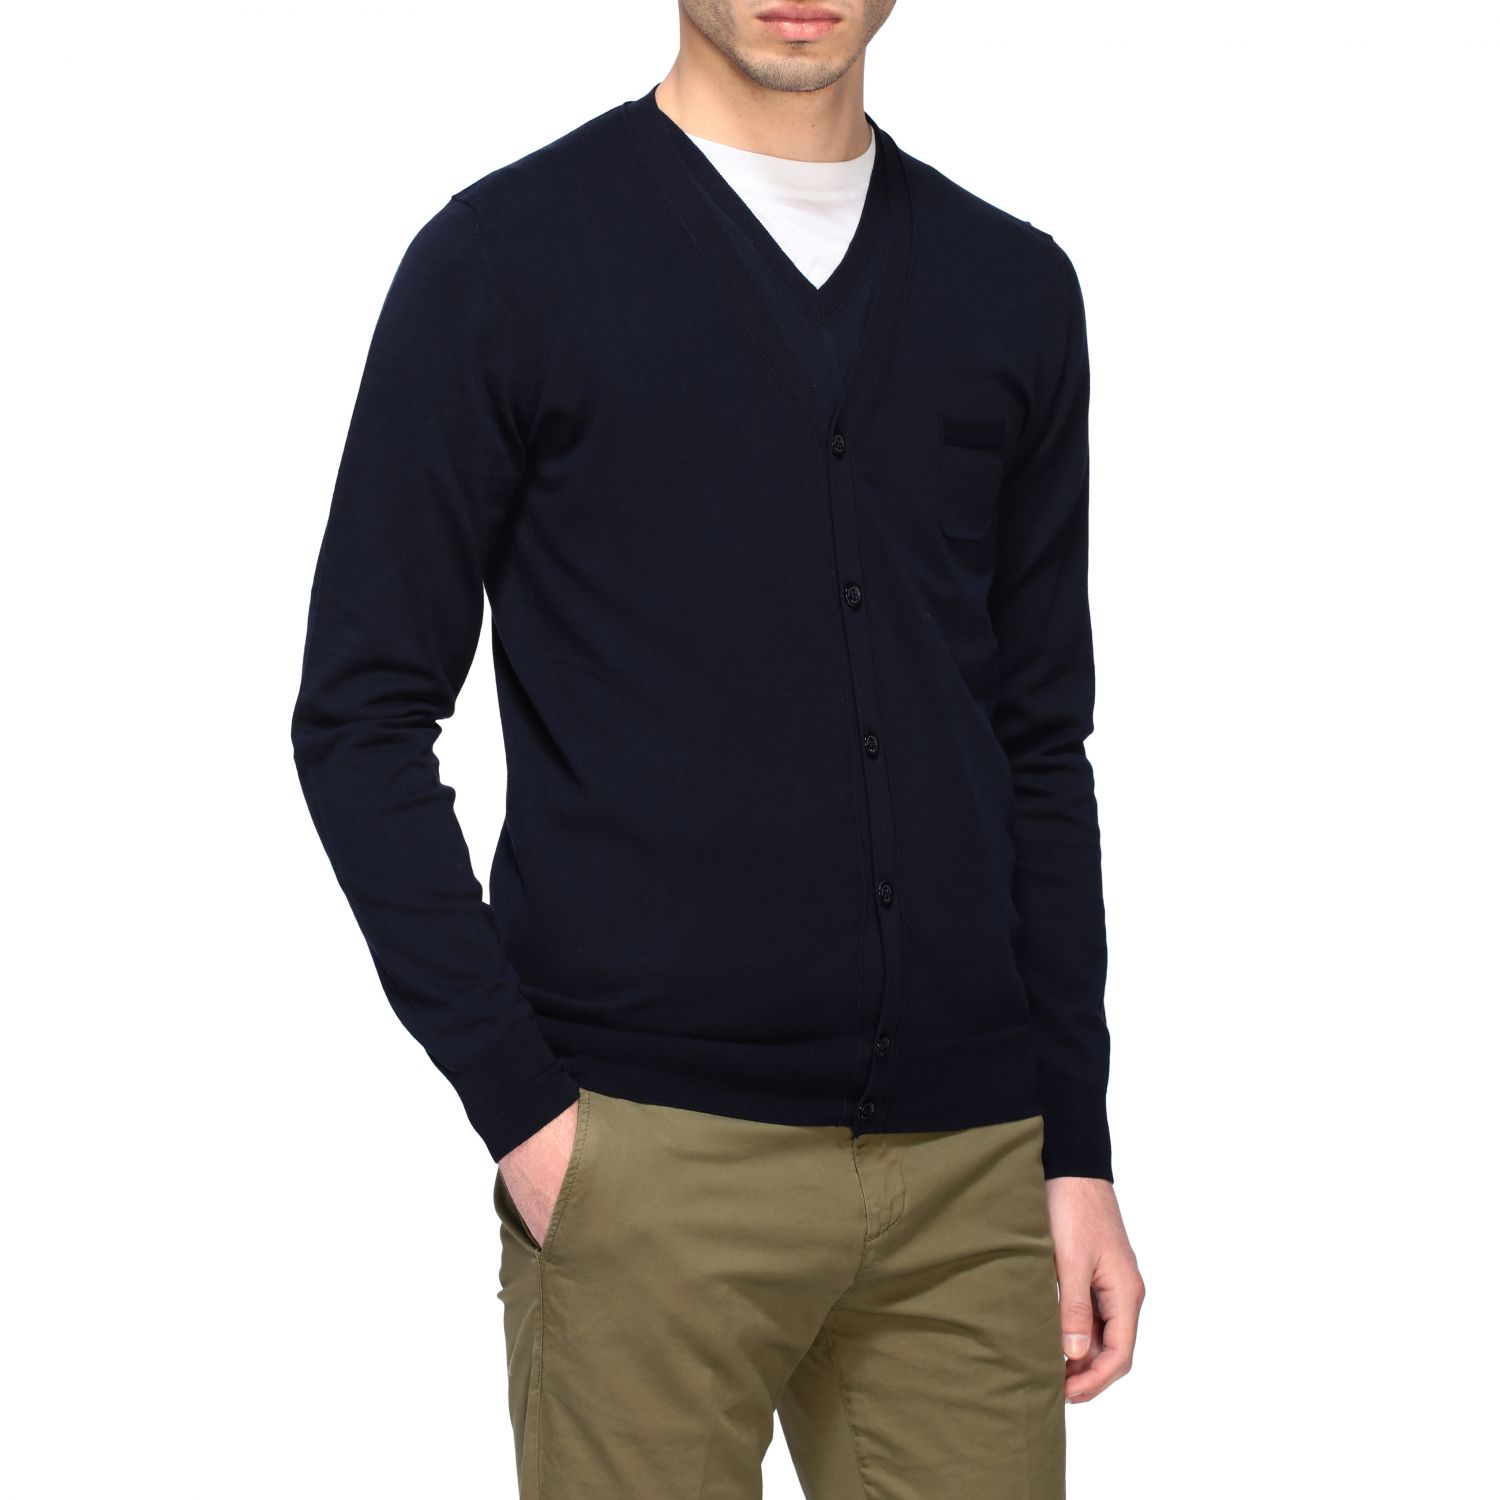 Paolo Pecora Outlet: cardigan for men - Blue | Paolo Pecora cardigan ...